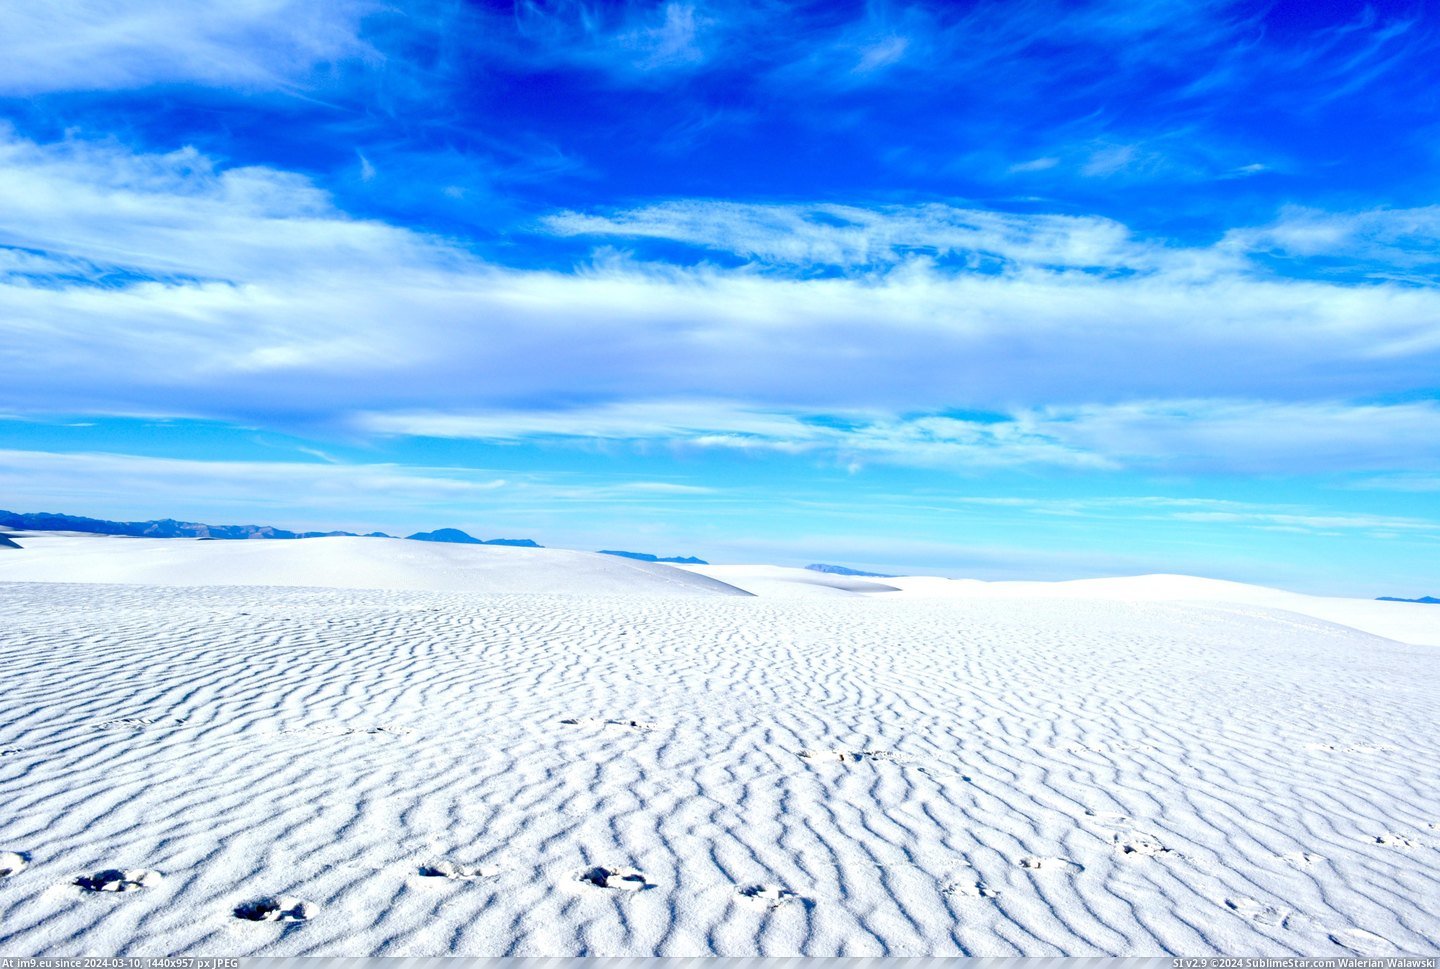 #One #White #National #Mexico #Sands #Exploring #Gems #America #Hidden #Monument [Earthporn] I have been exploring America's hidden gems lately. This one is taken in White Sands National Monument, New Mexico.  Pic. (Bild von album My r/EARTHPORN favs))